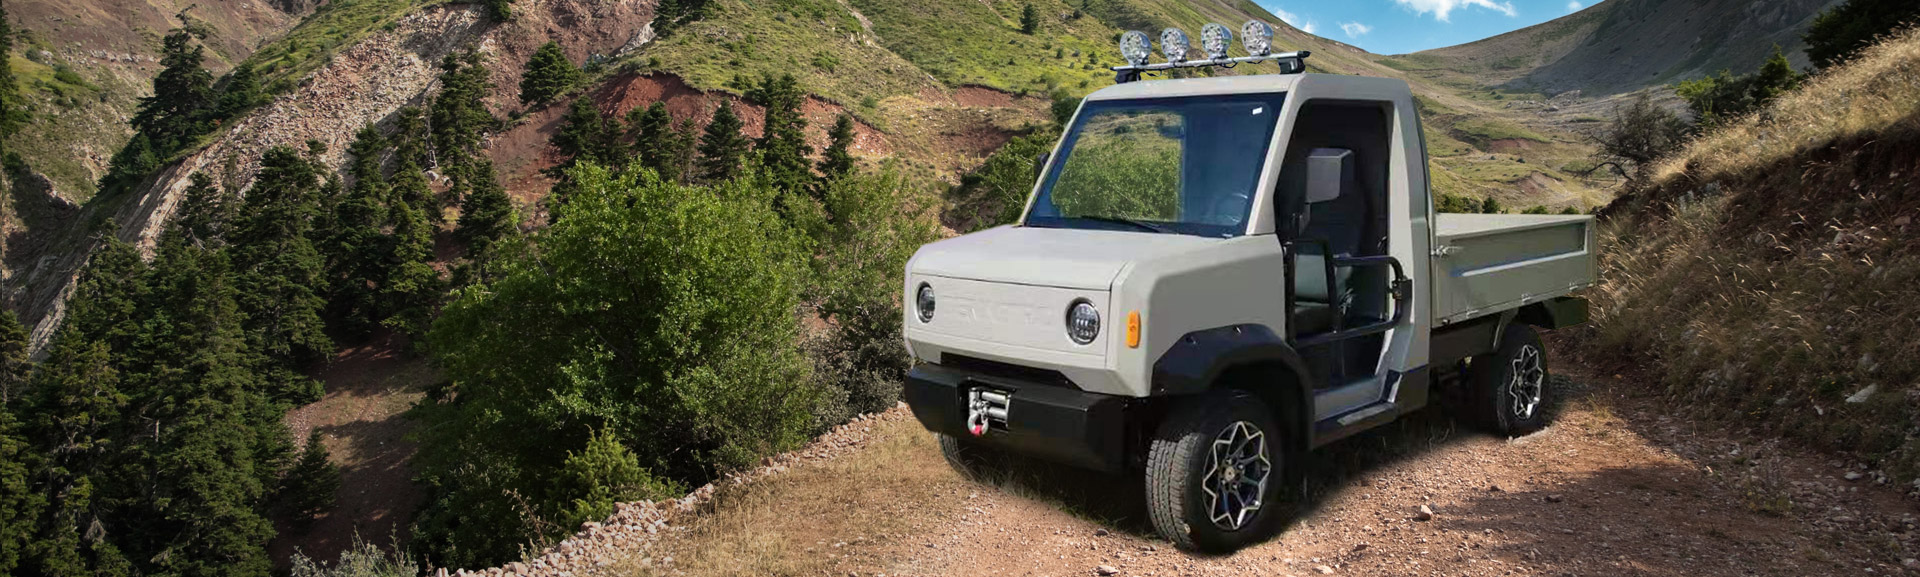 ORV electric off-road vehicle